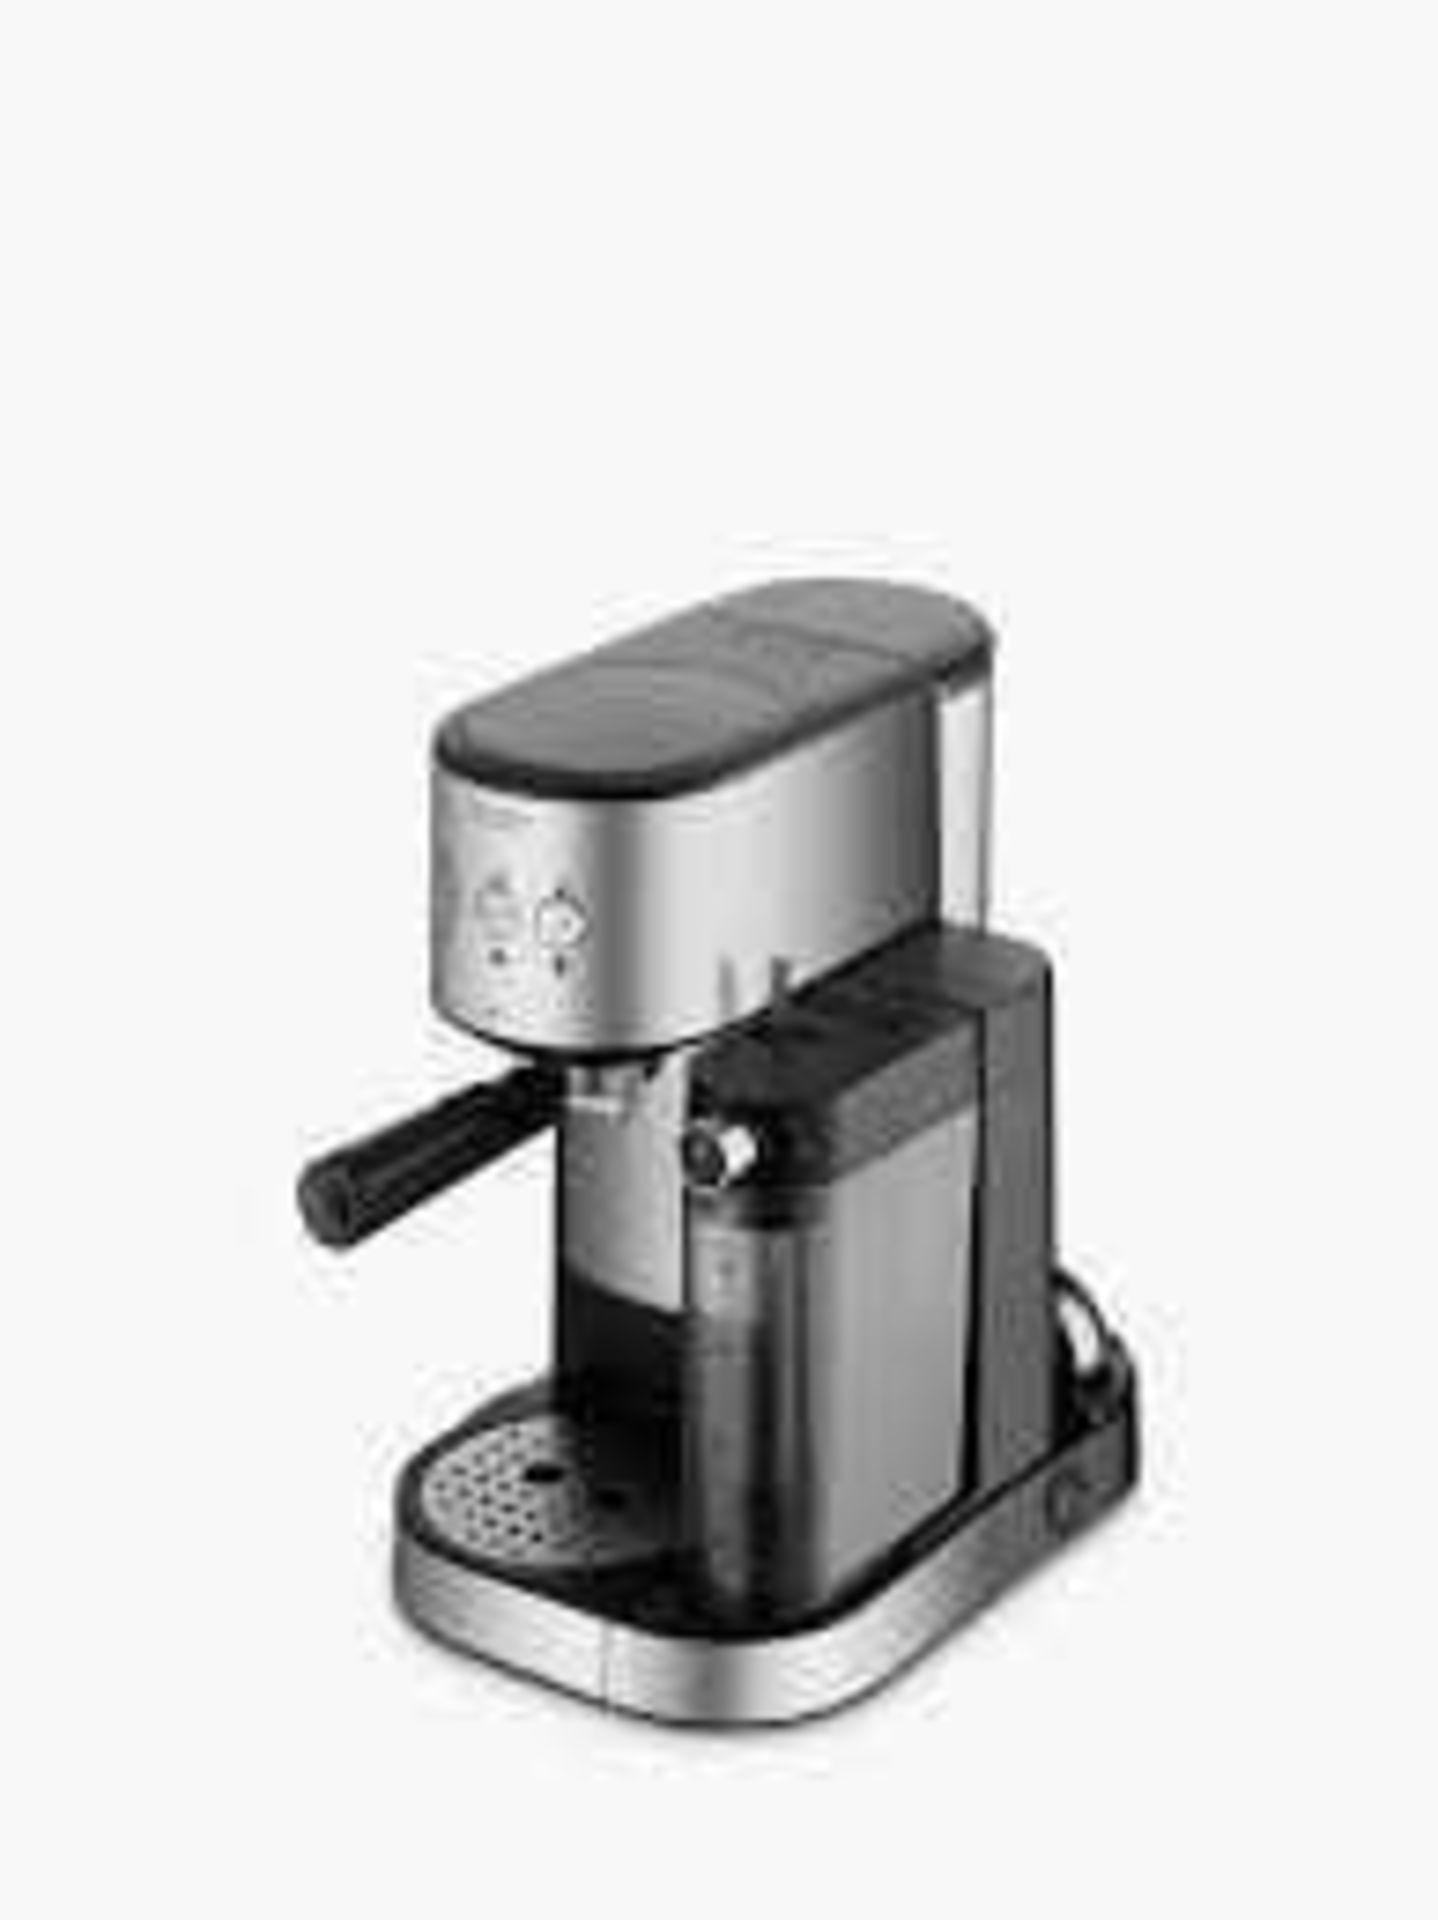 Combined RRP £130 Lot To Contain John Lewis Pump Espresso Coffee Machine With Integrated Milk System